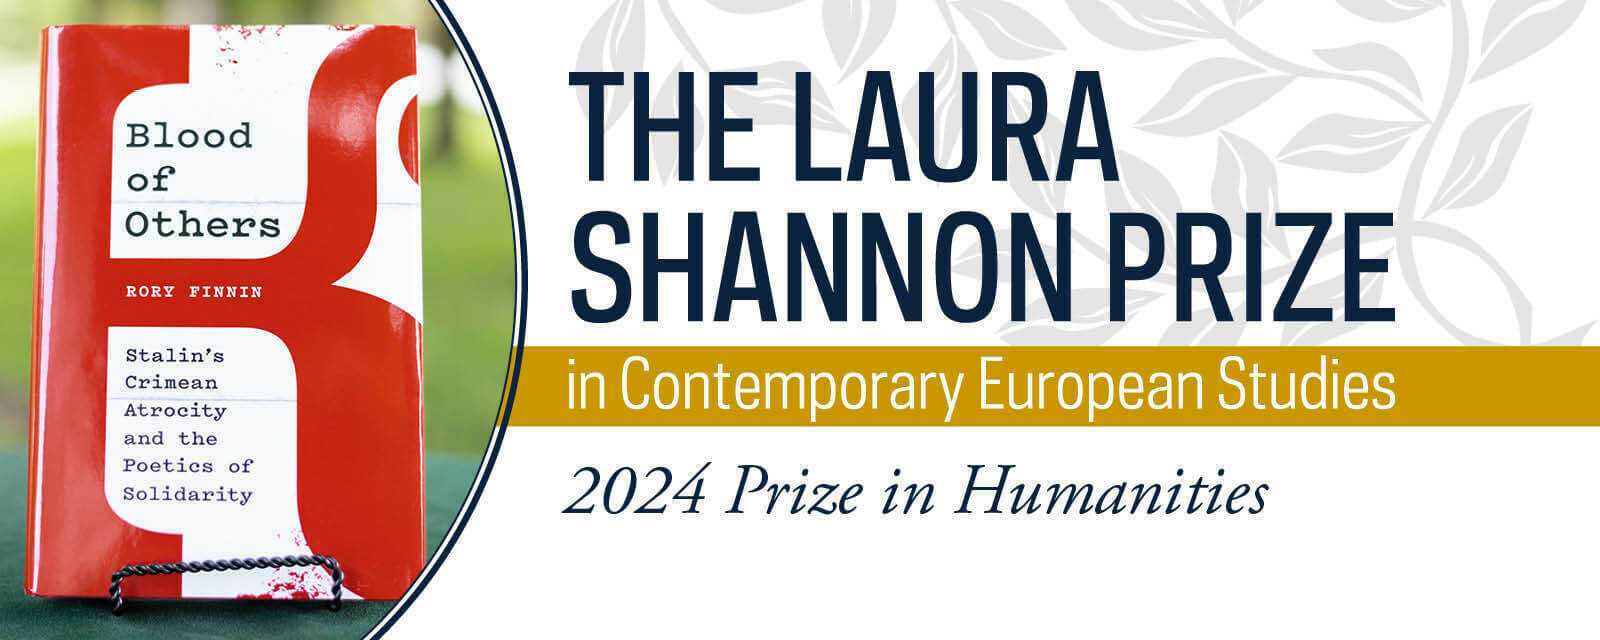 The Laura Shannon prize in Contemporary European Studies: 2024 Prize in Humanities